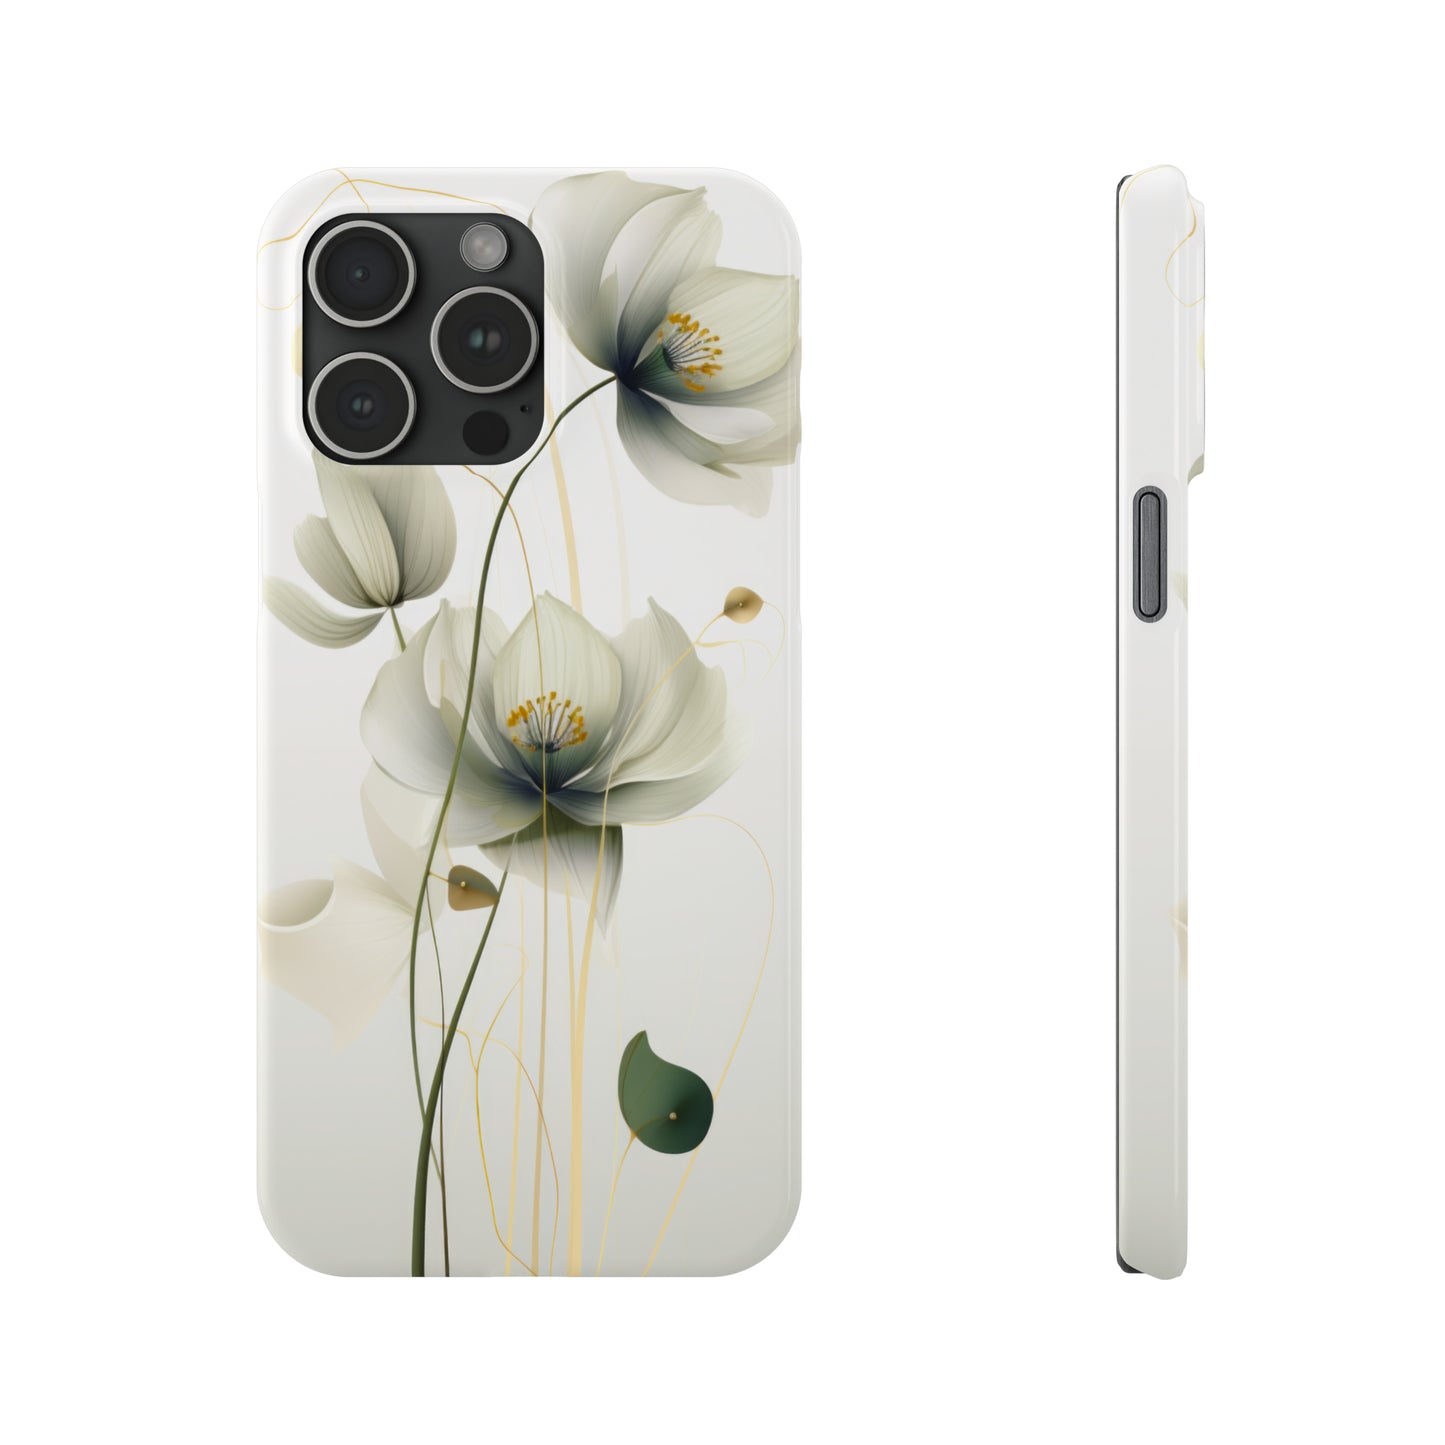 Chic Floral iPhone Case